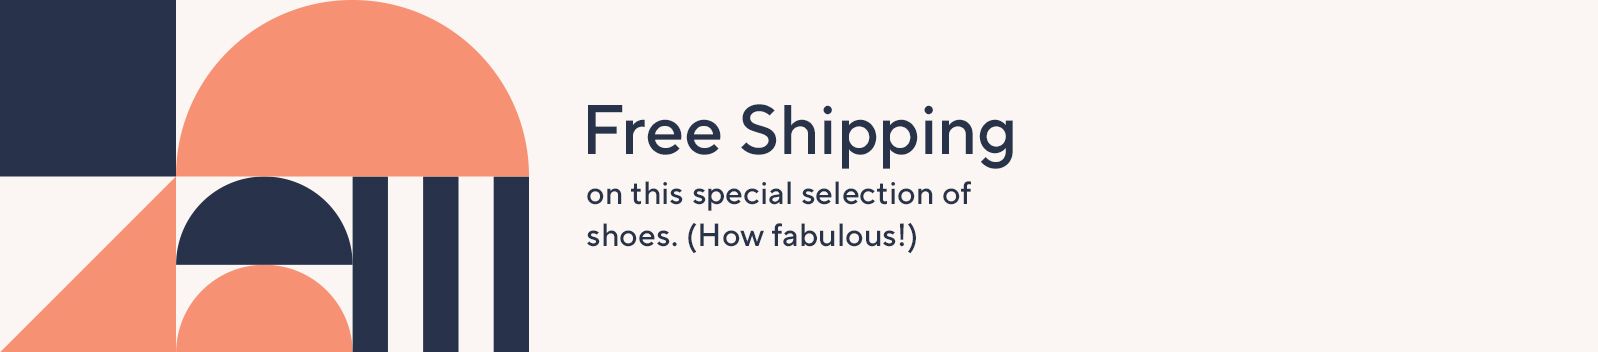 Free Shipping on this special selection of shoes. (How fabulous!)